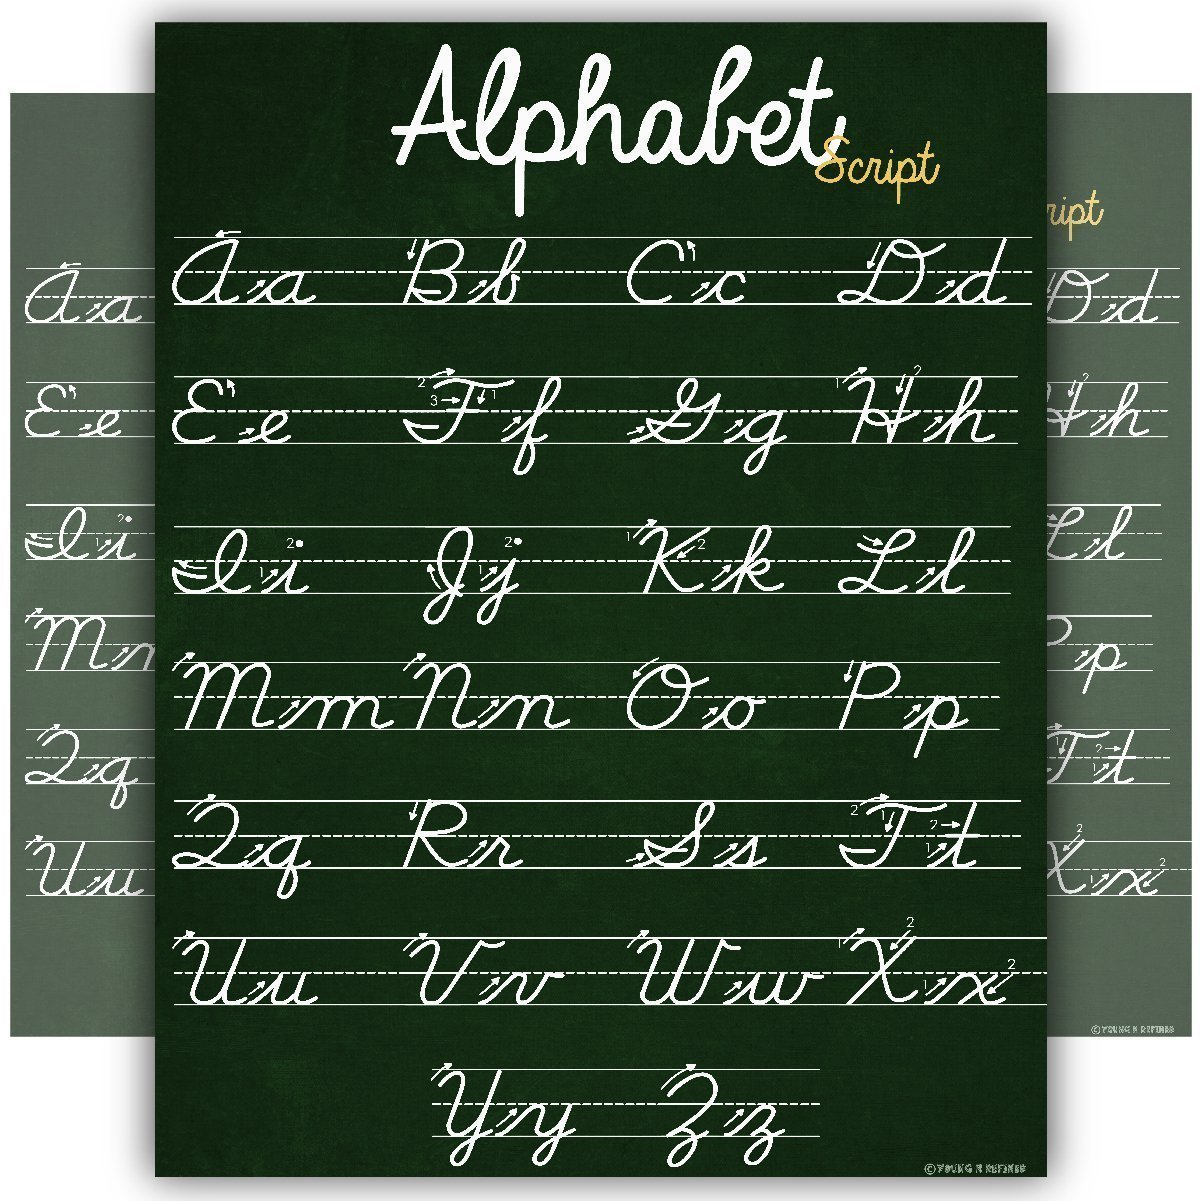 ABC alphabet poster EXTRA LARGE teaching Chart Clear White LAMINATED huge  and child bedroom poster edu